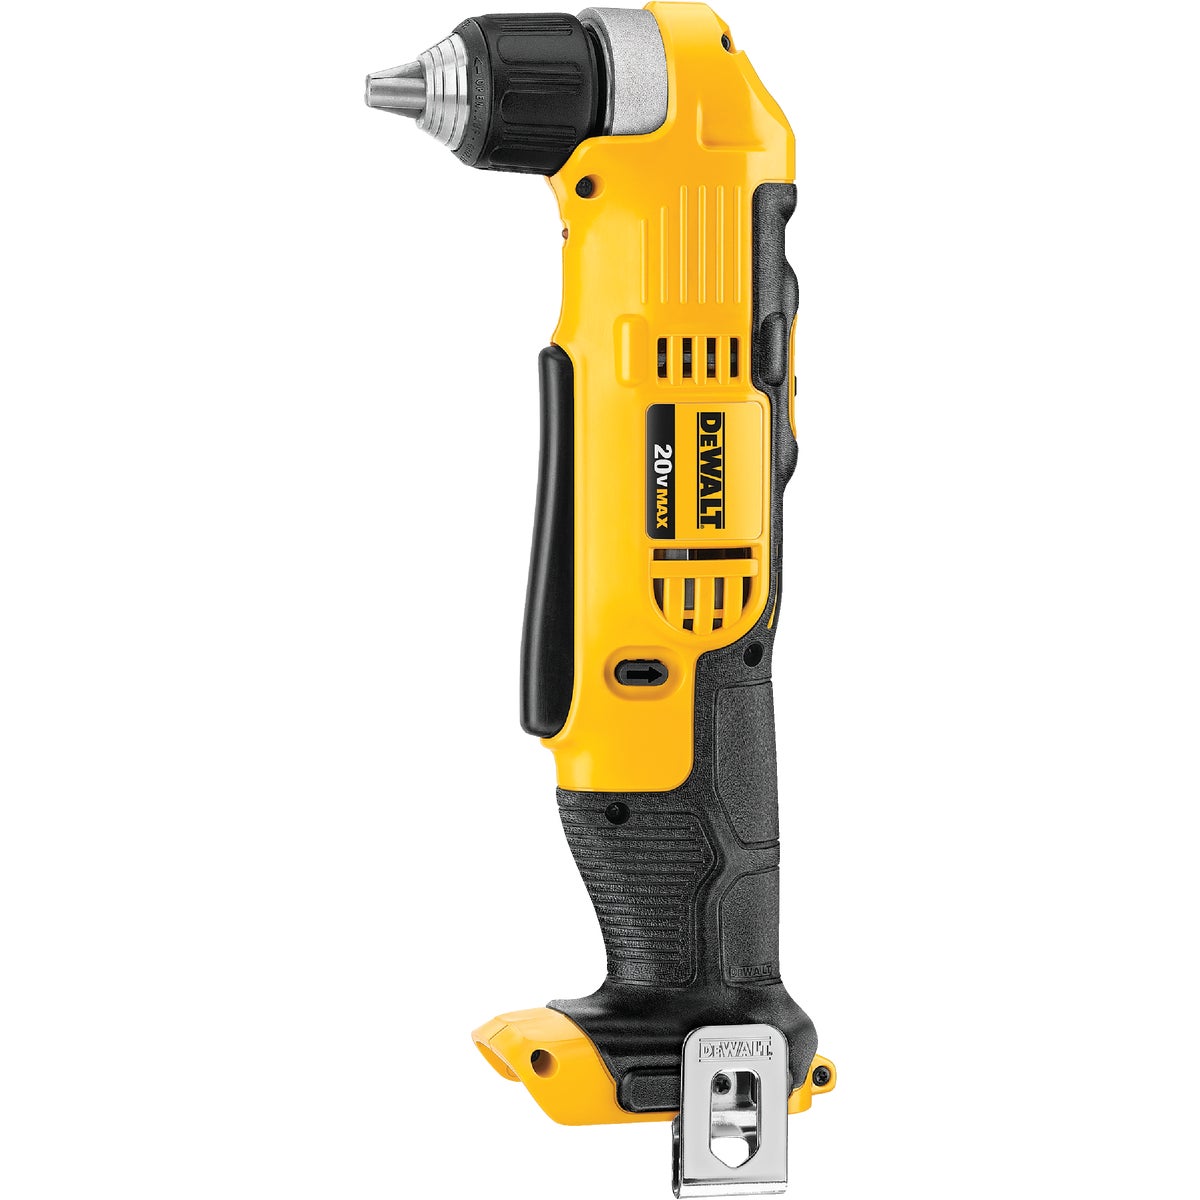 DEWALT 20-Volt MAX Lithium-Ion 3/8 In. Cordless Angle Drill (Tool Only)